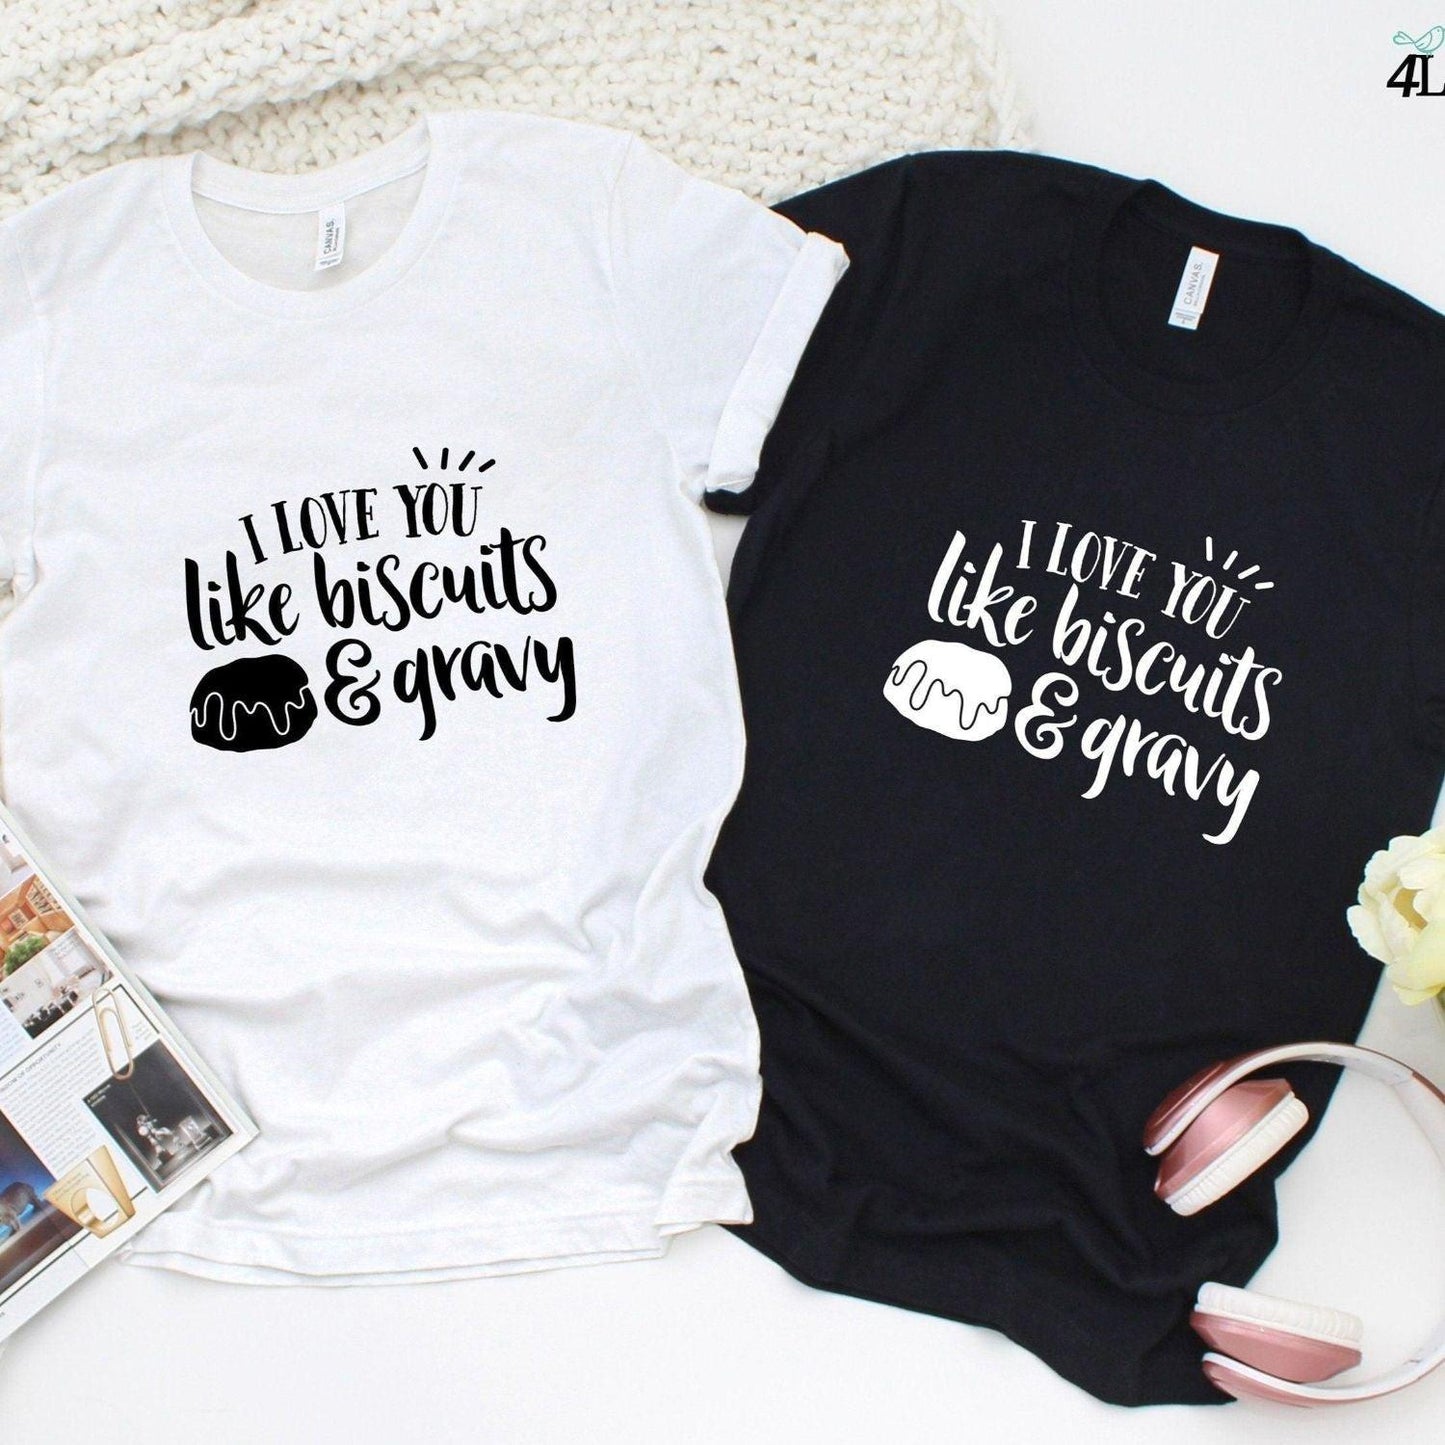 Matching Set for Foodie Couple: I Love You Like Biscuits & Gravy Tops, Valentine Gift - 4Lovebirds